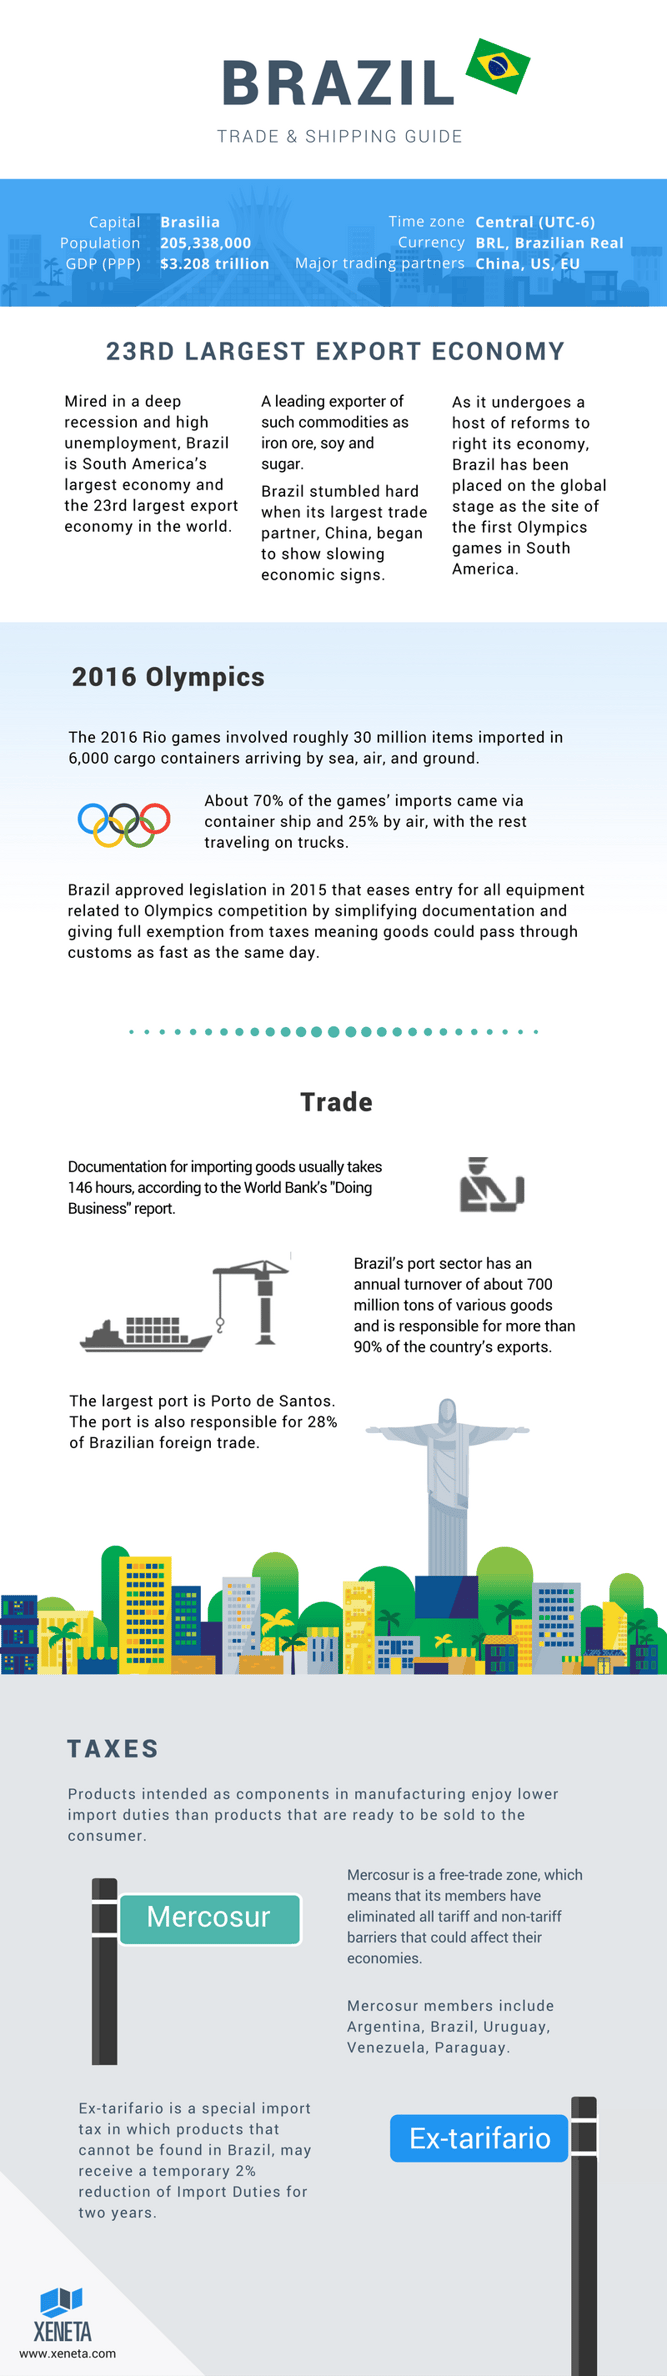 BRAZIL trade and shipping guide